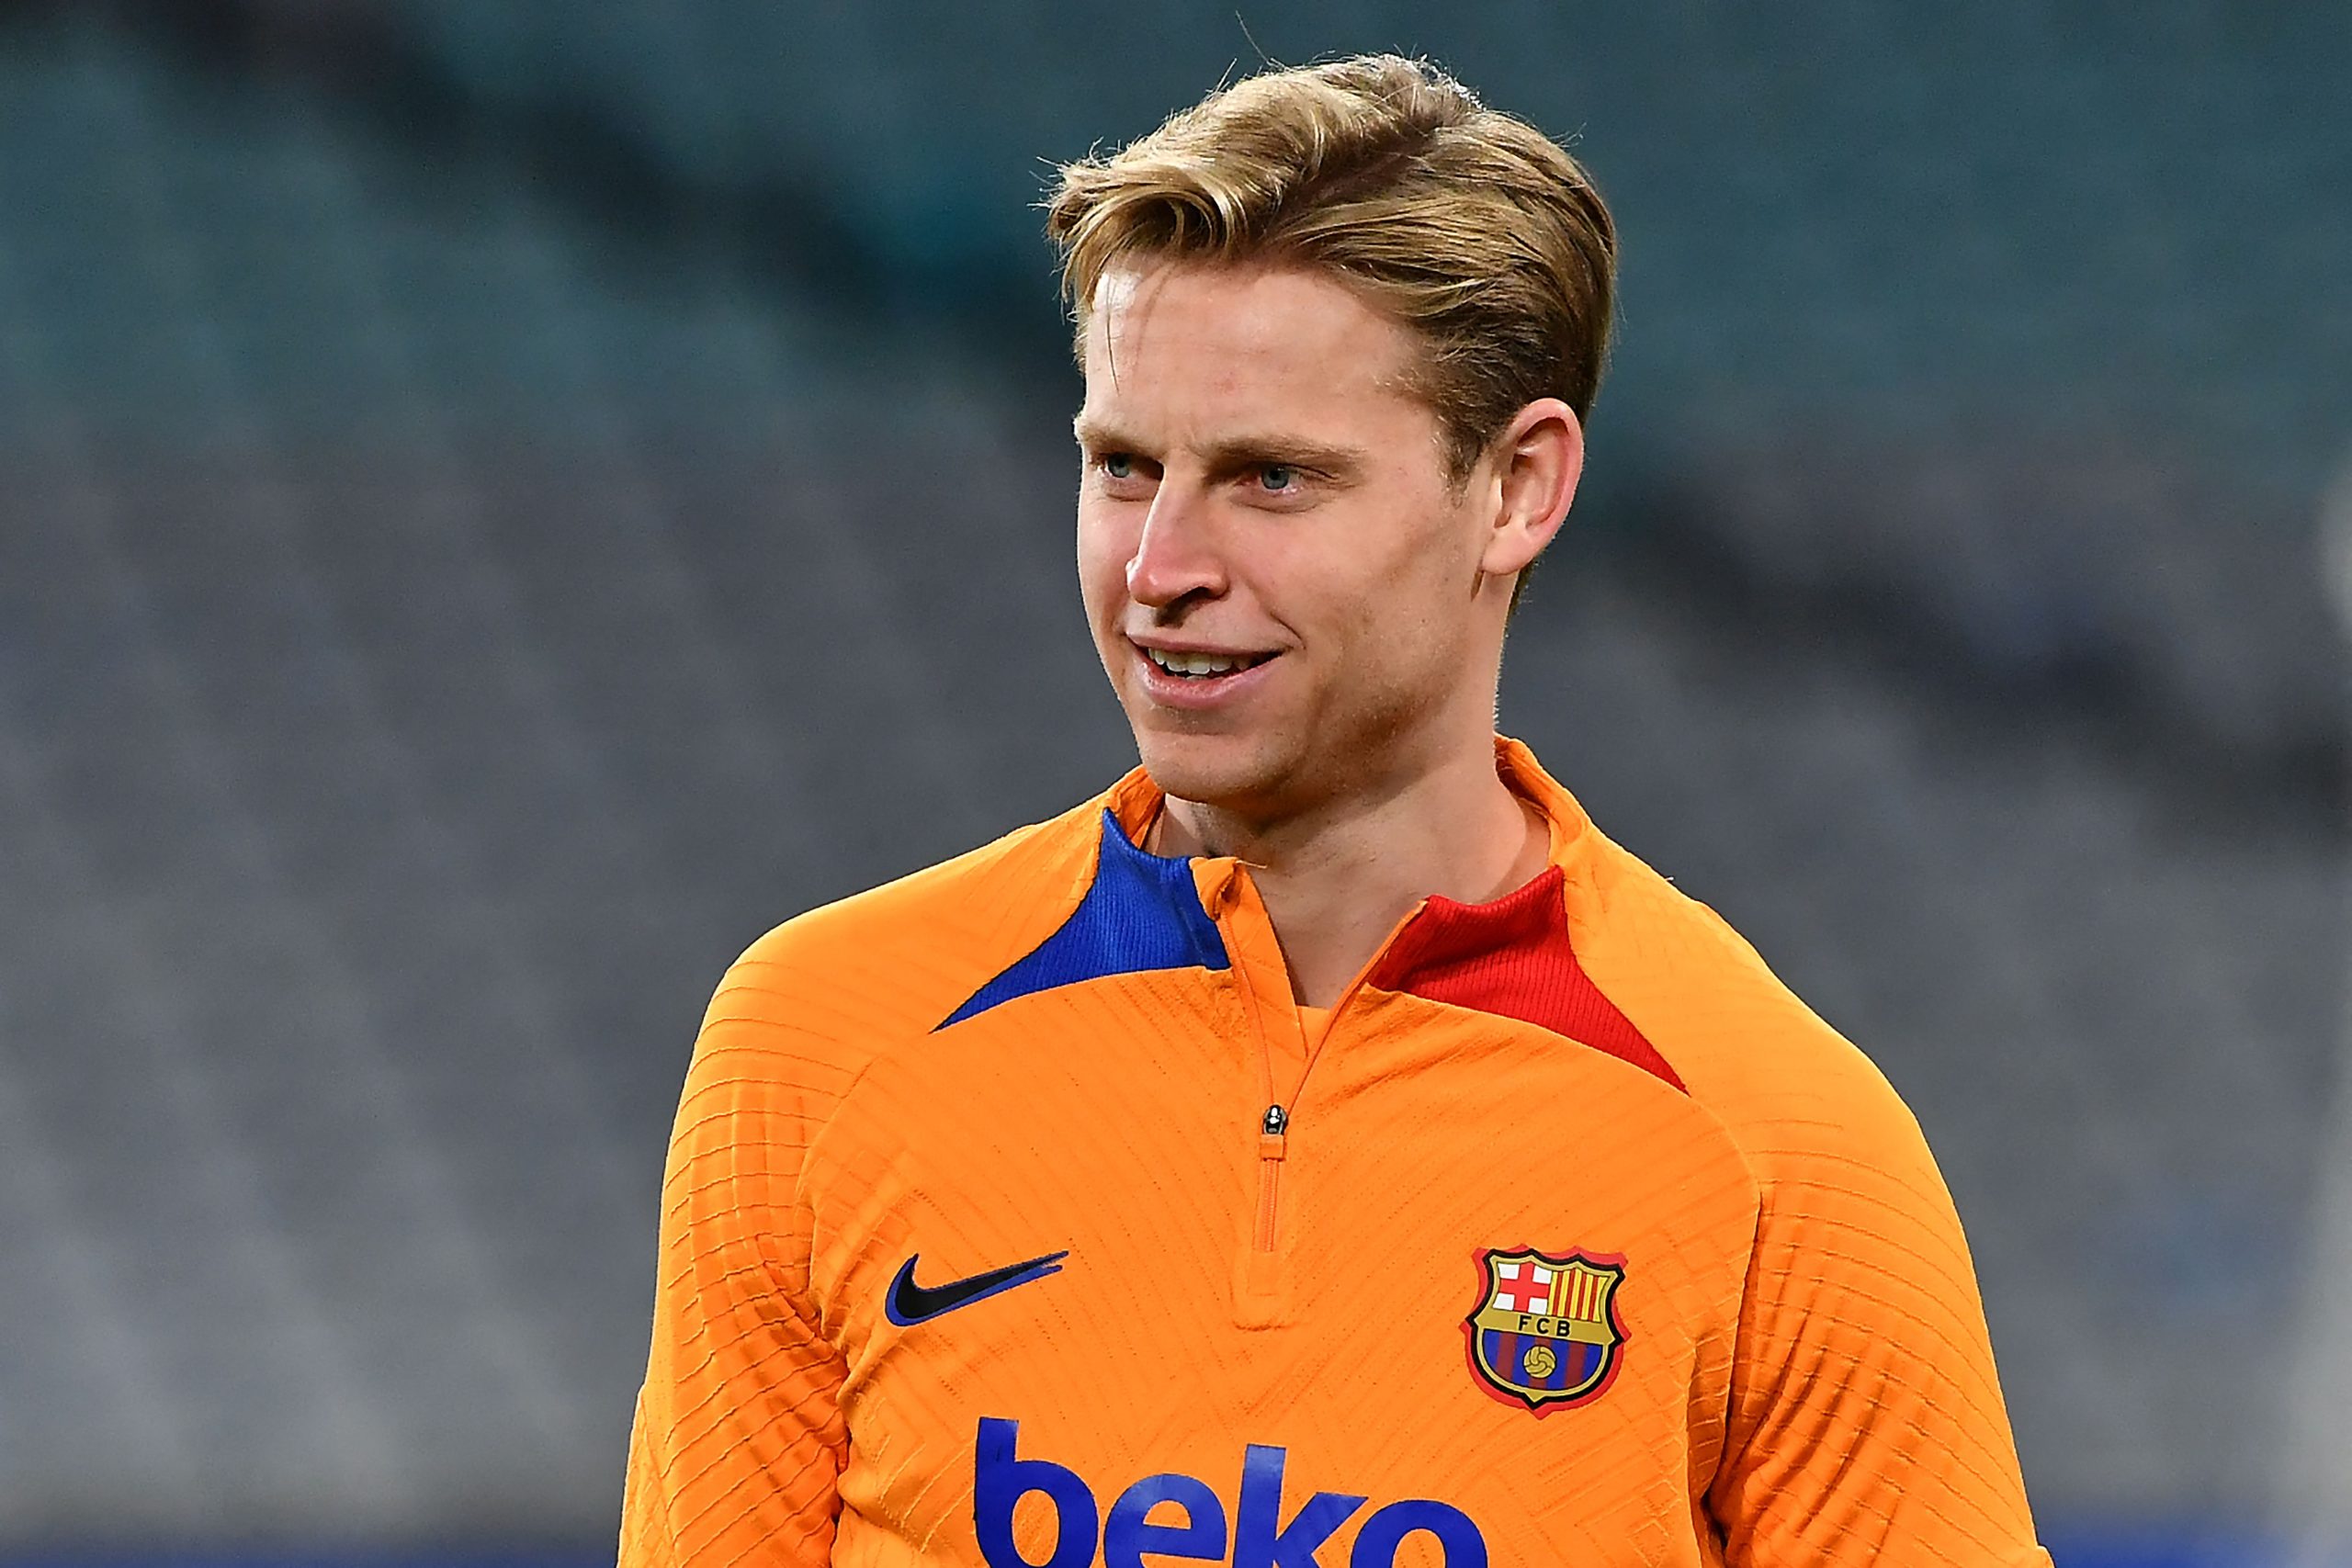 Transfer News: Frenkie de Jong likely to stay at Barcelona amid Chelsea interest.